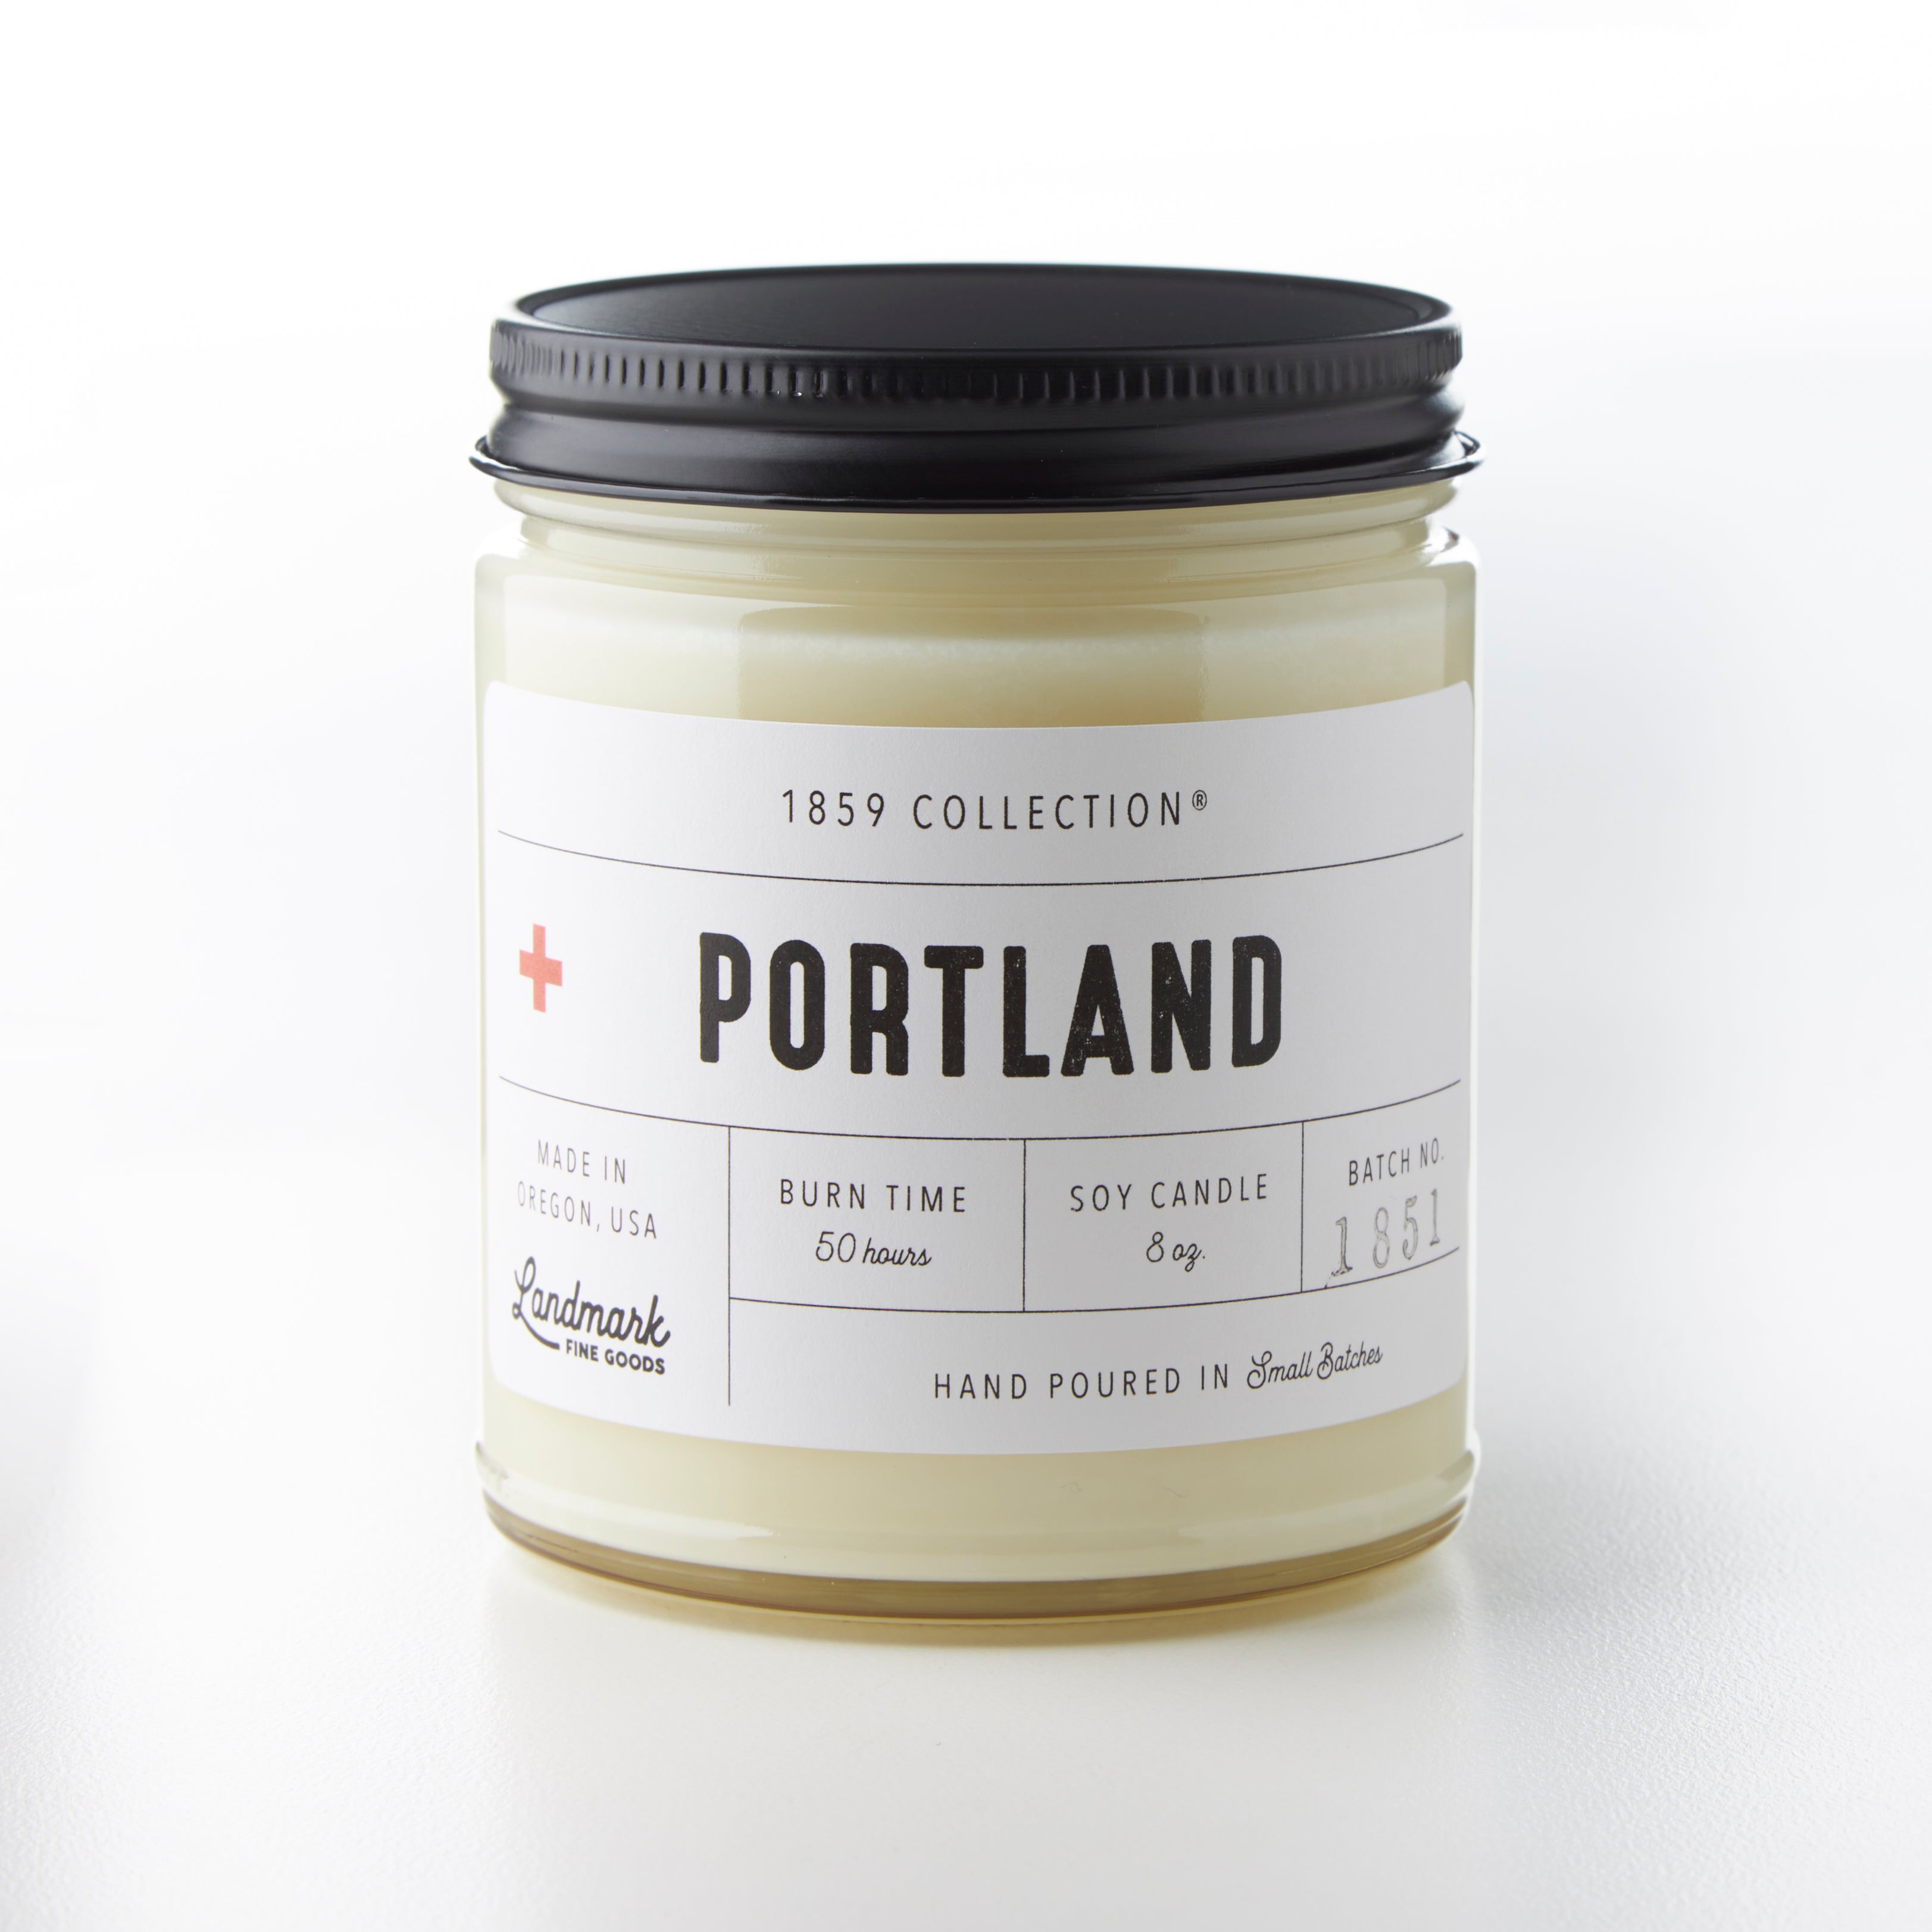 Portland Candle - 1859 Collection®